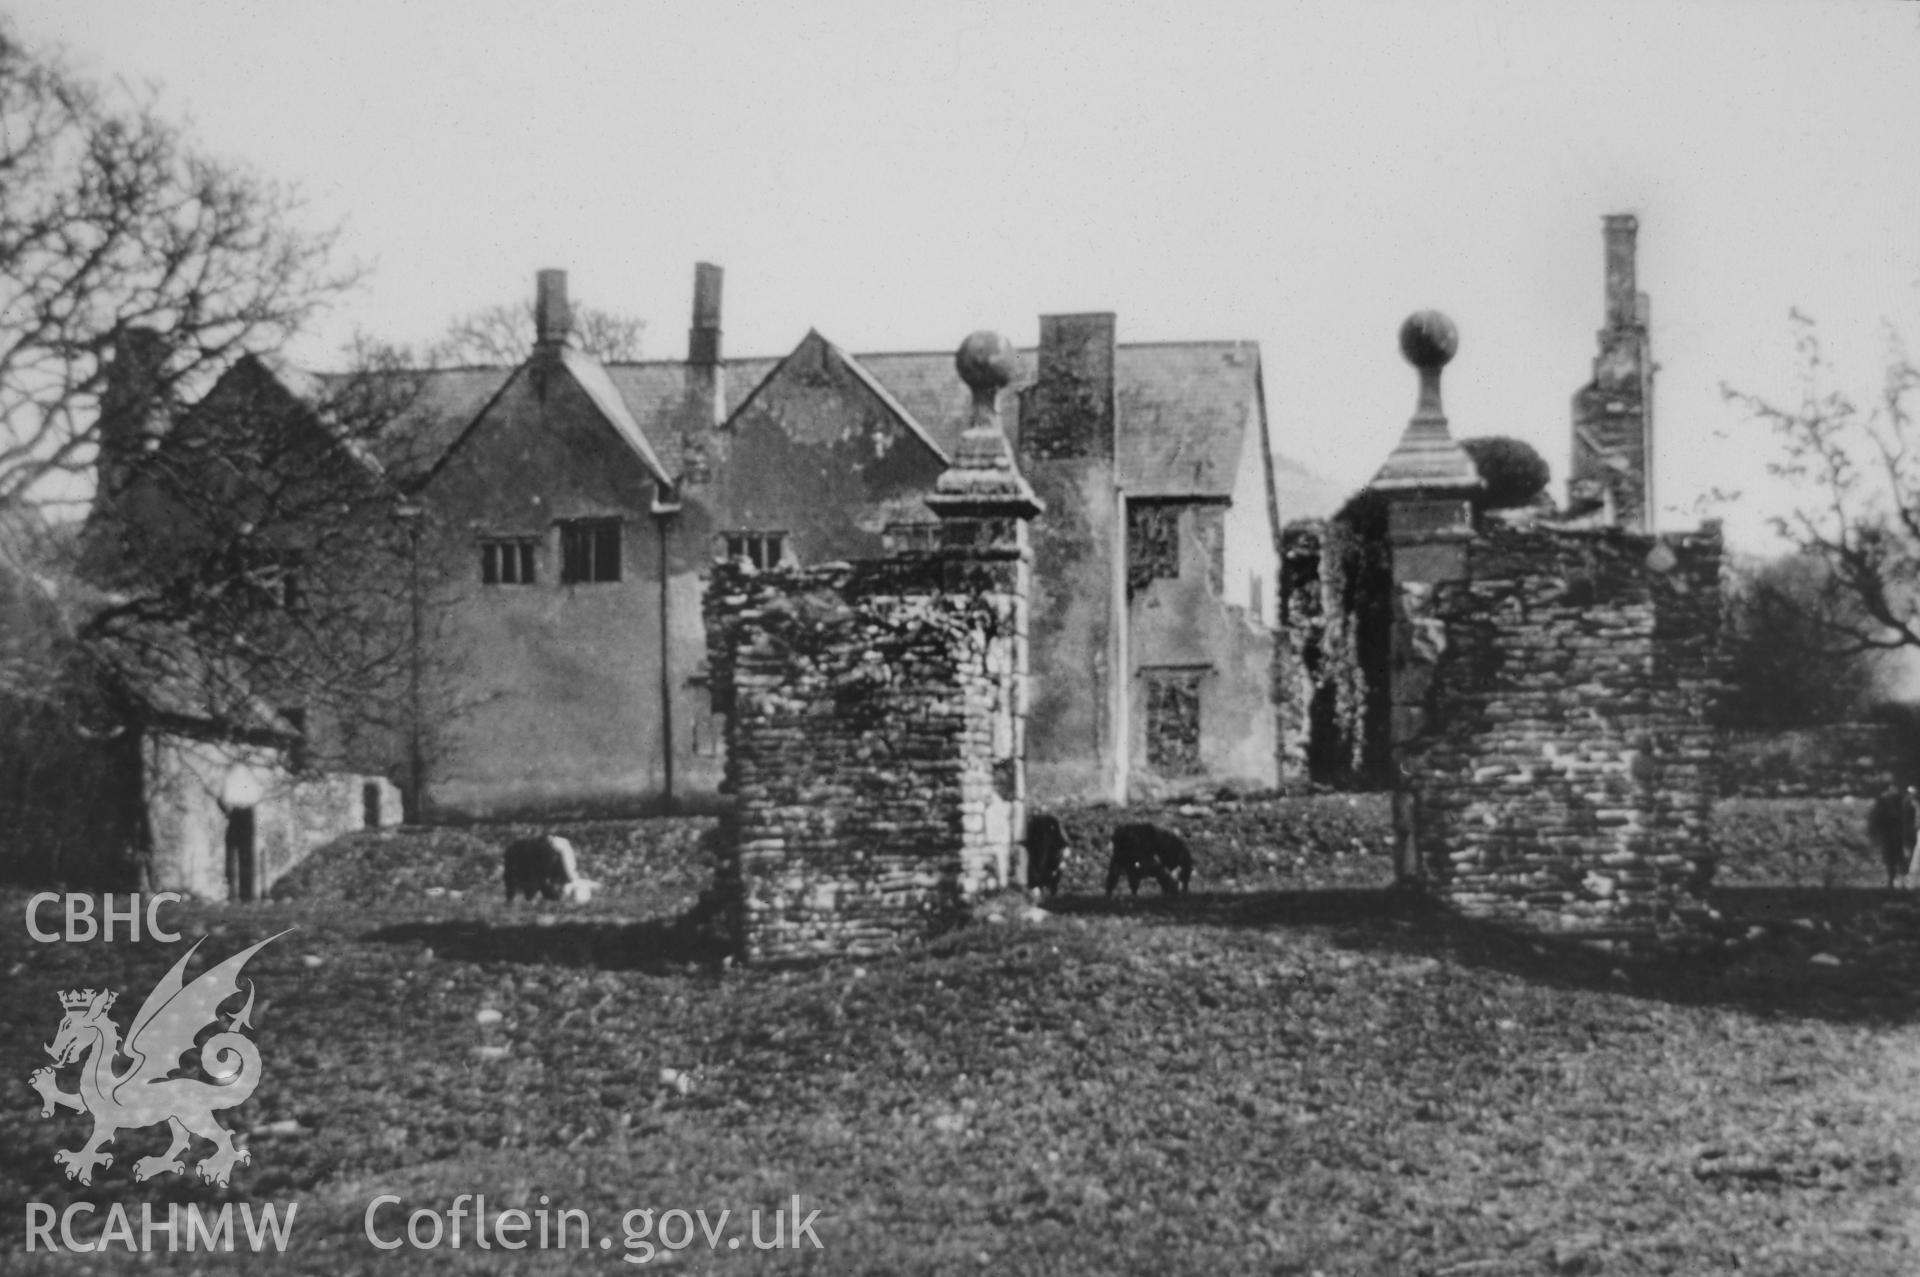 Copy transparency of black and white photograph, exterior of Old Gwernyfed, Tregoyd. From an original held at Brecon Museum, undated.